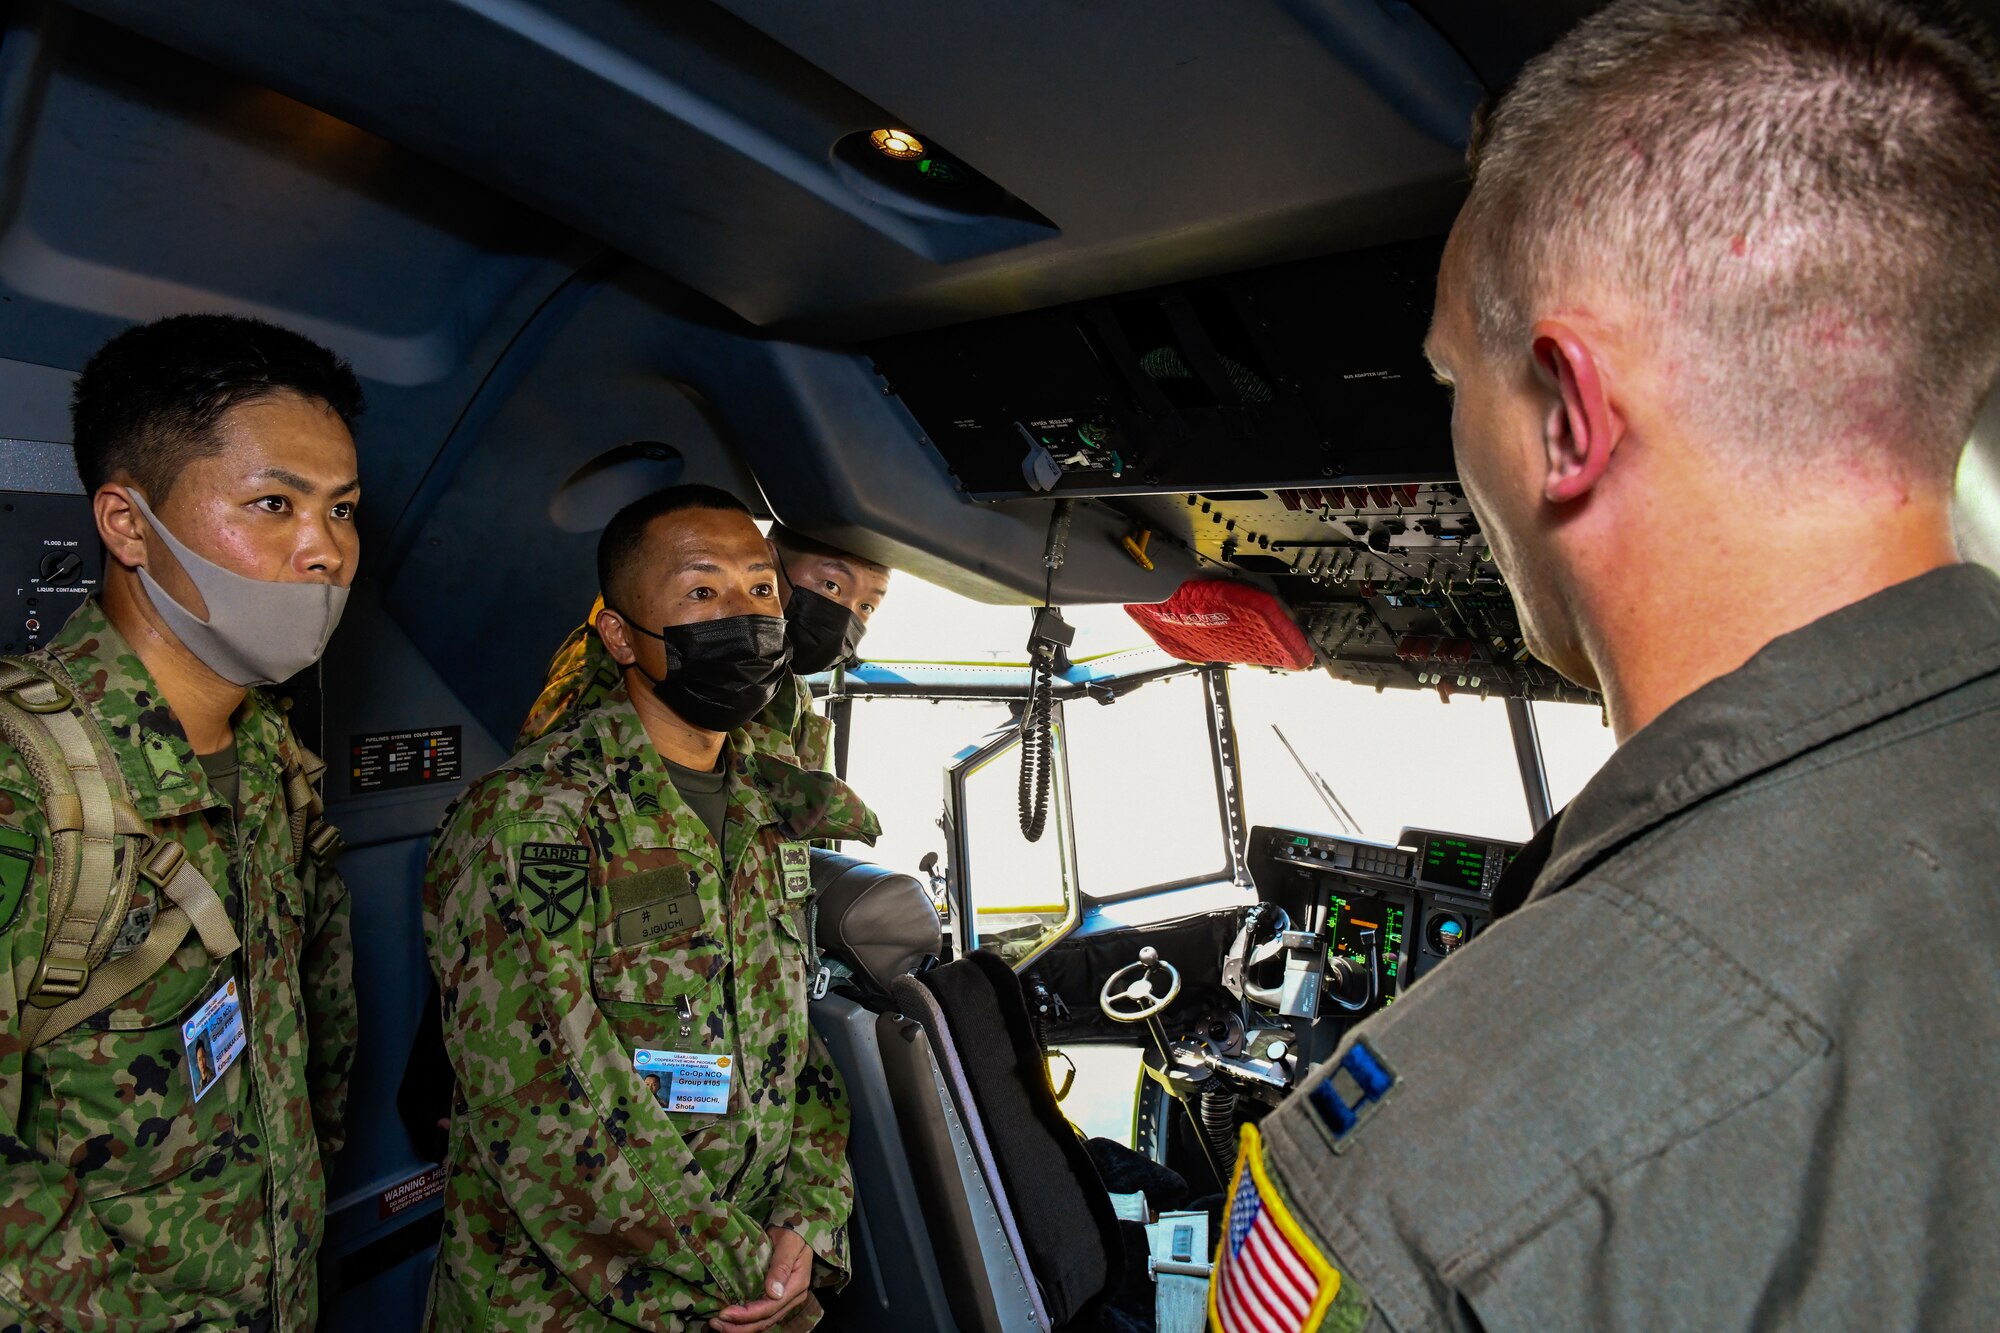 Japan Ground Self-Defense Force Sgt. Katsuya Nakakubo, left, and Master Sgt. Shota Iguchi, middle, listen as U.S. Air Force Capt. David Hood, 36th Airlift Squadron C-130J Super Hercules pilot, briefs them on the capabilities of the C-130J, at Yokota Air Base, Japan, Aug. 9, 2022. Members of the JGSDF along with U.S. Army Soldiers from Camp Zama, Japan, visited Yokota, as part of a six-week cooperative work program. This program is an opportunity for JGSDF and U.S. Army service members to improve bilateral relations, enhance language comprehension skills, learn about each others cultures and familiarize themselves with bilateral military doctrine and techniques. (U.S. Air Force photo by Tech. Sgt. Garrett Cole)